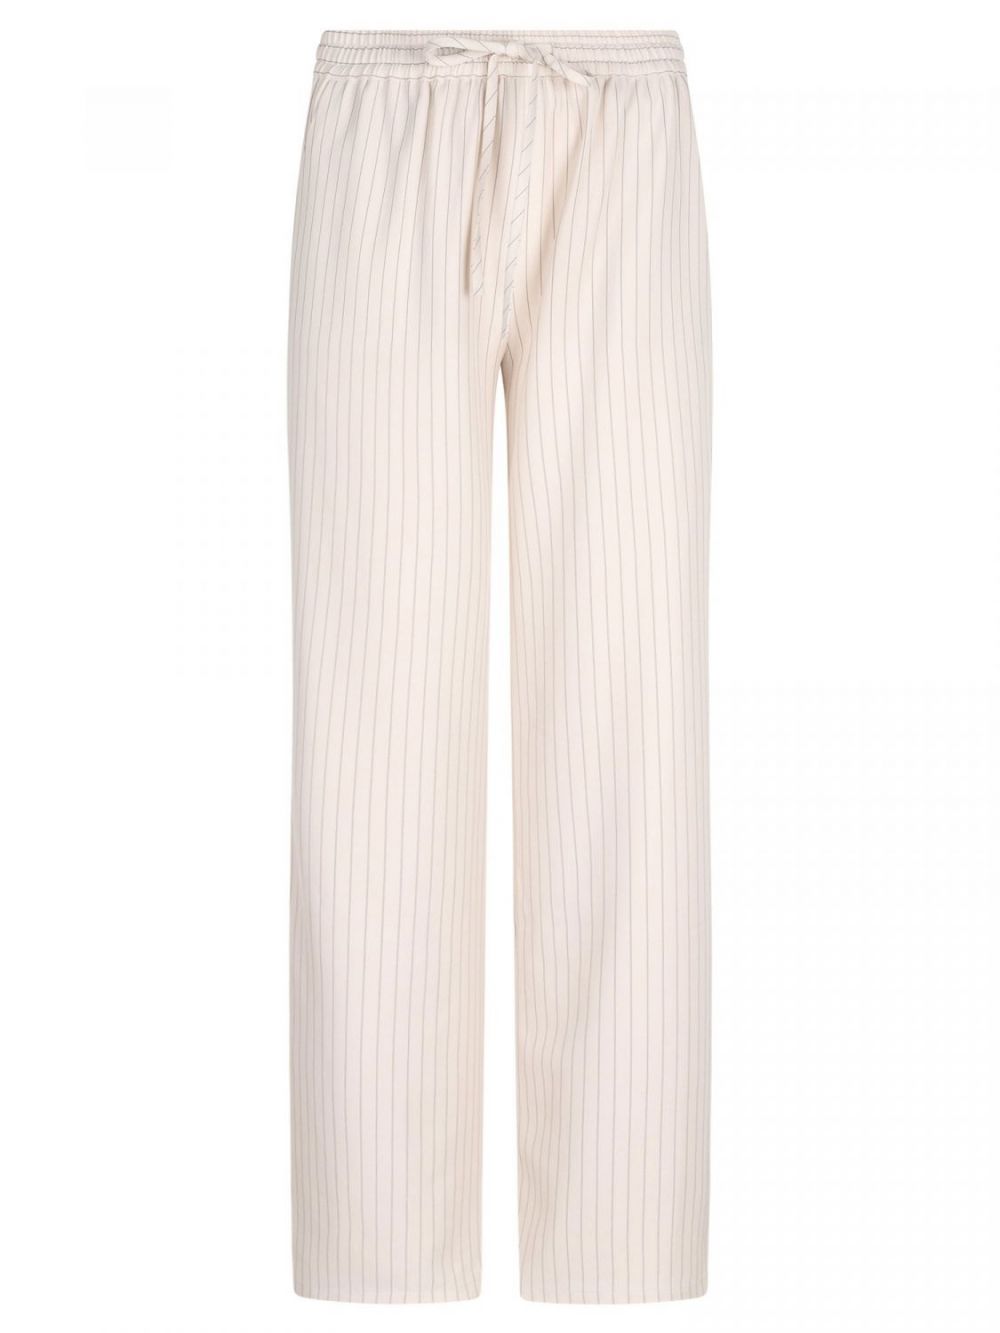 pants maartje off white front